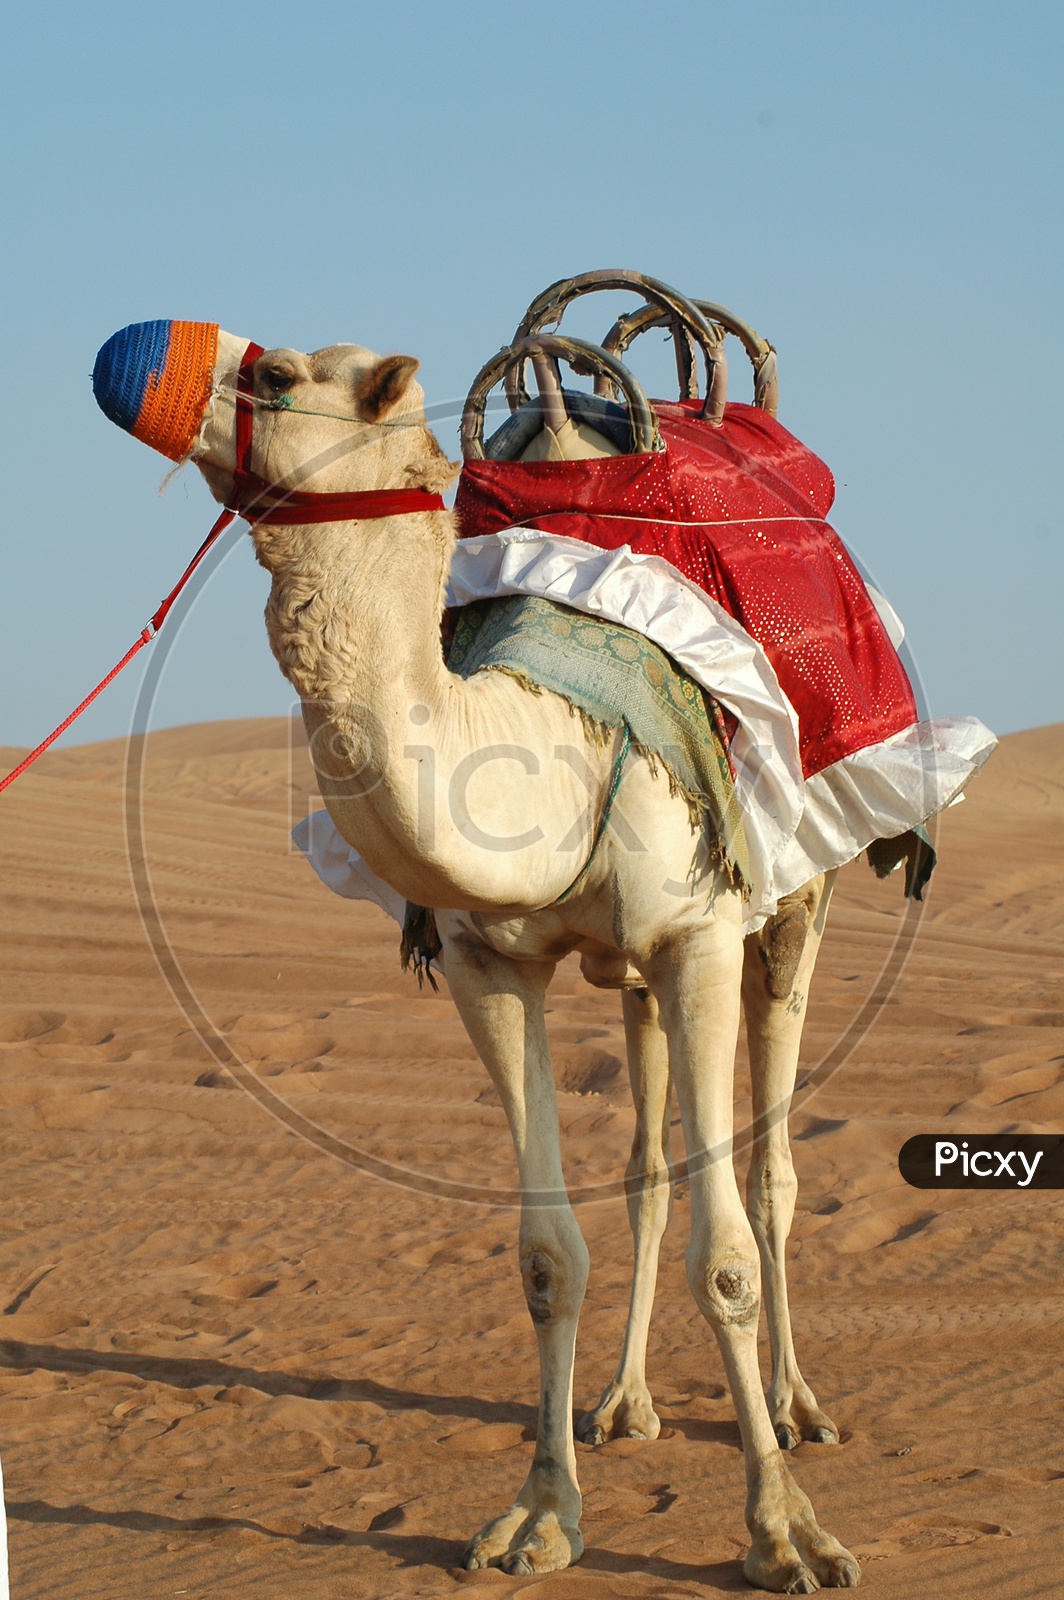 Decorated camel for a ride in the desert